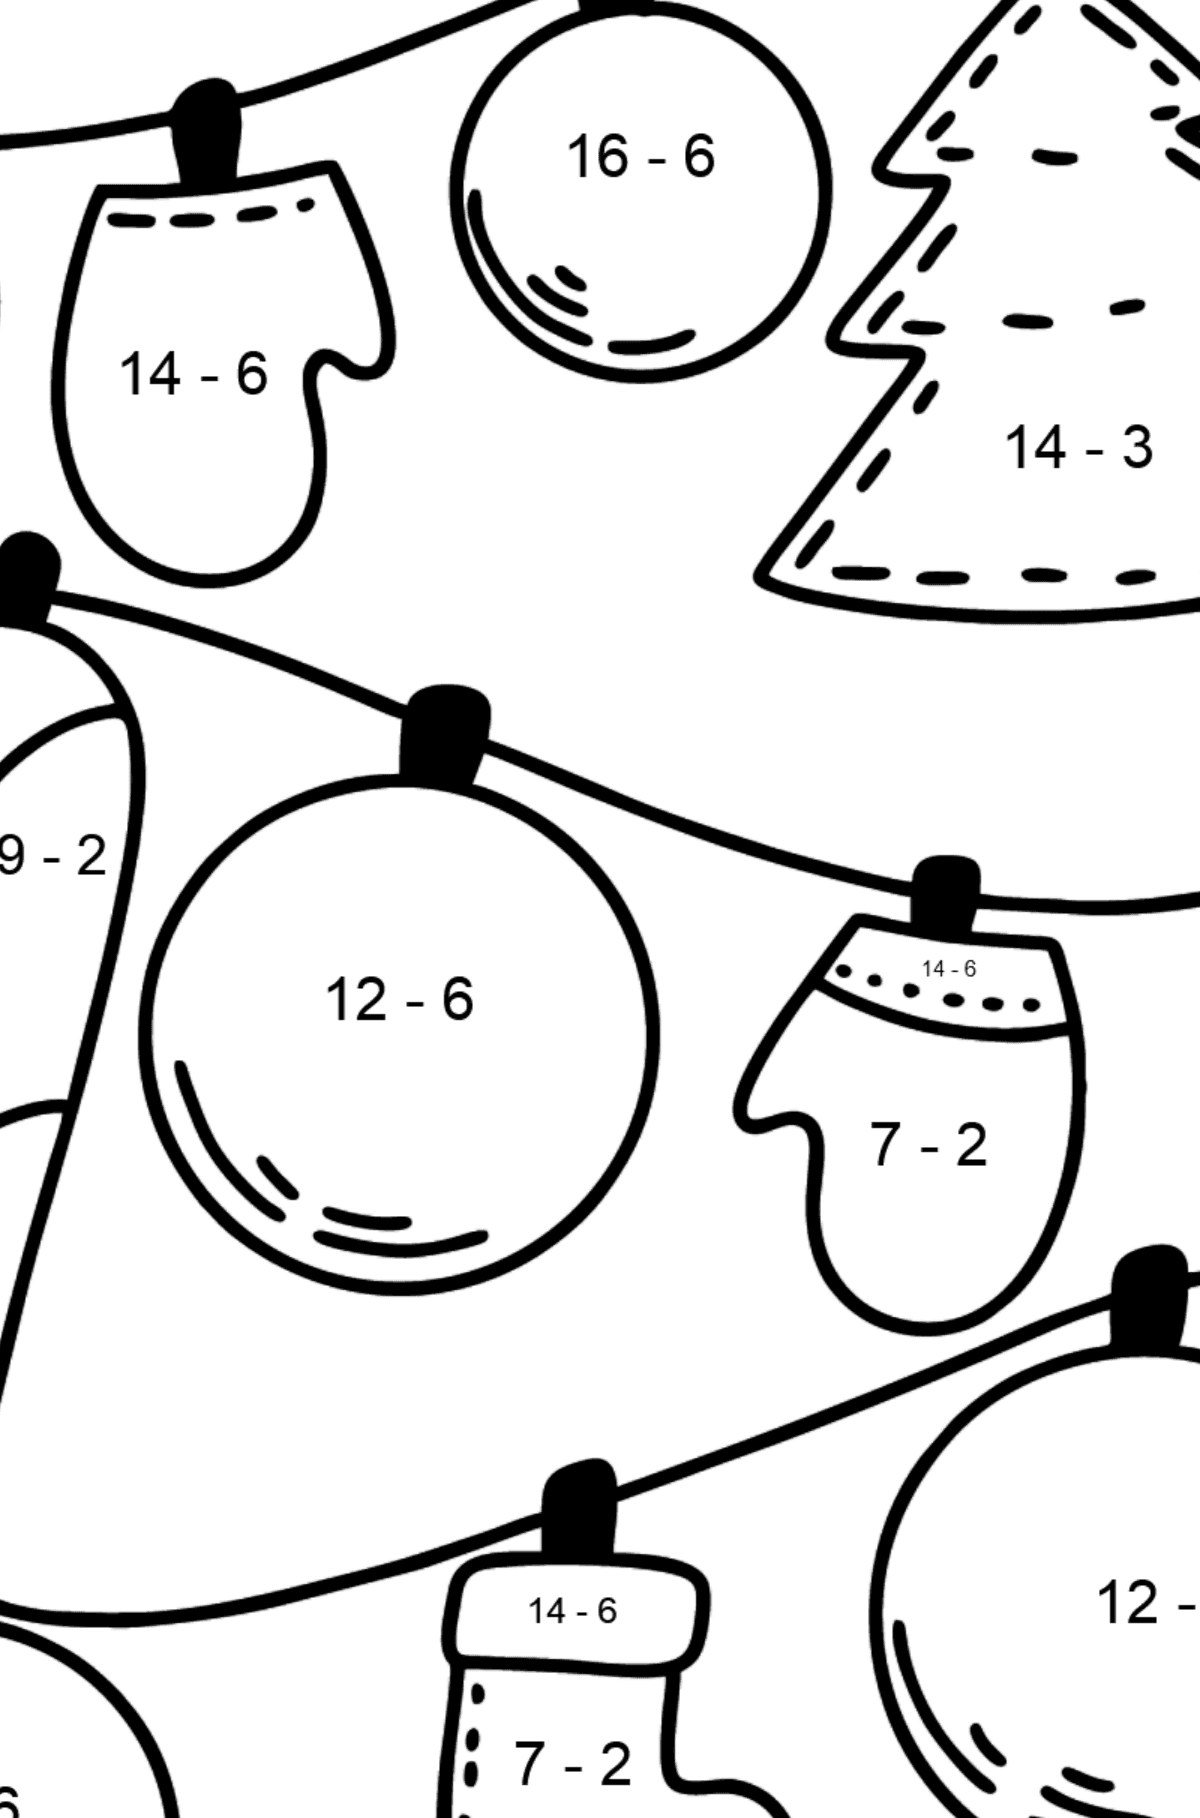 Christmas garland coloring page - Math Coloring - Subtraction for Kids